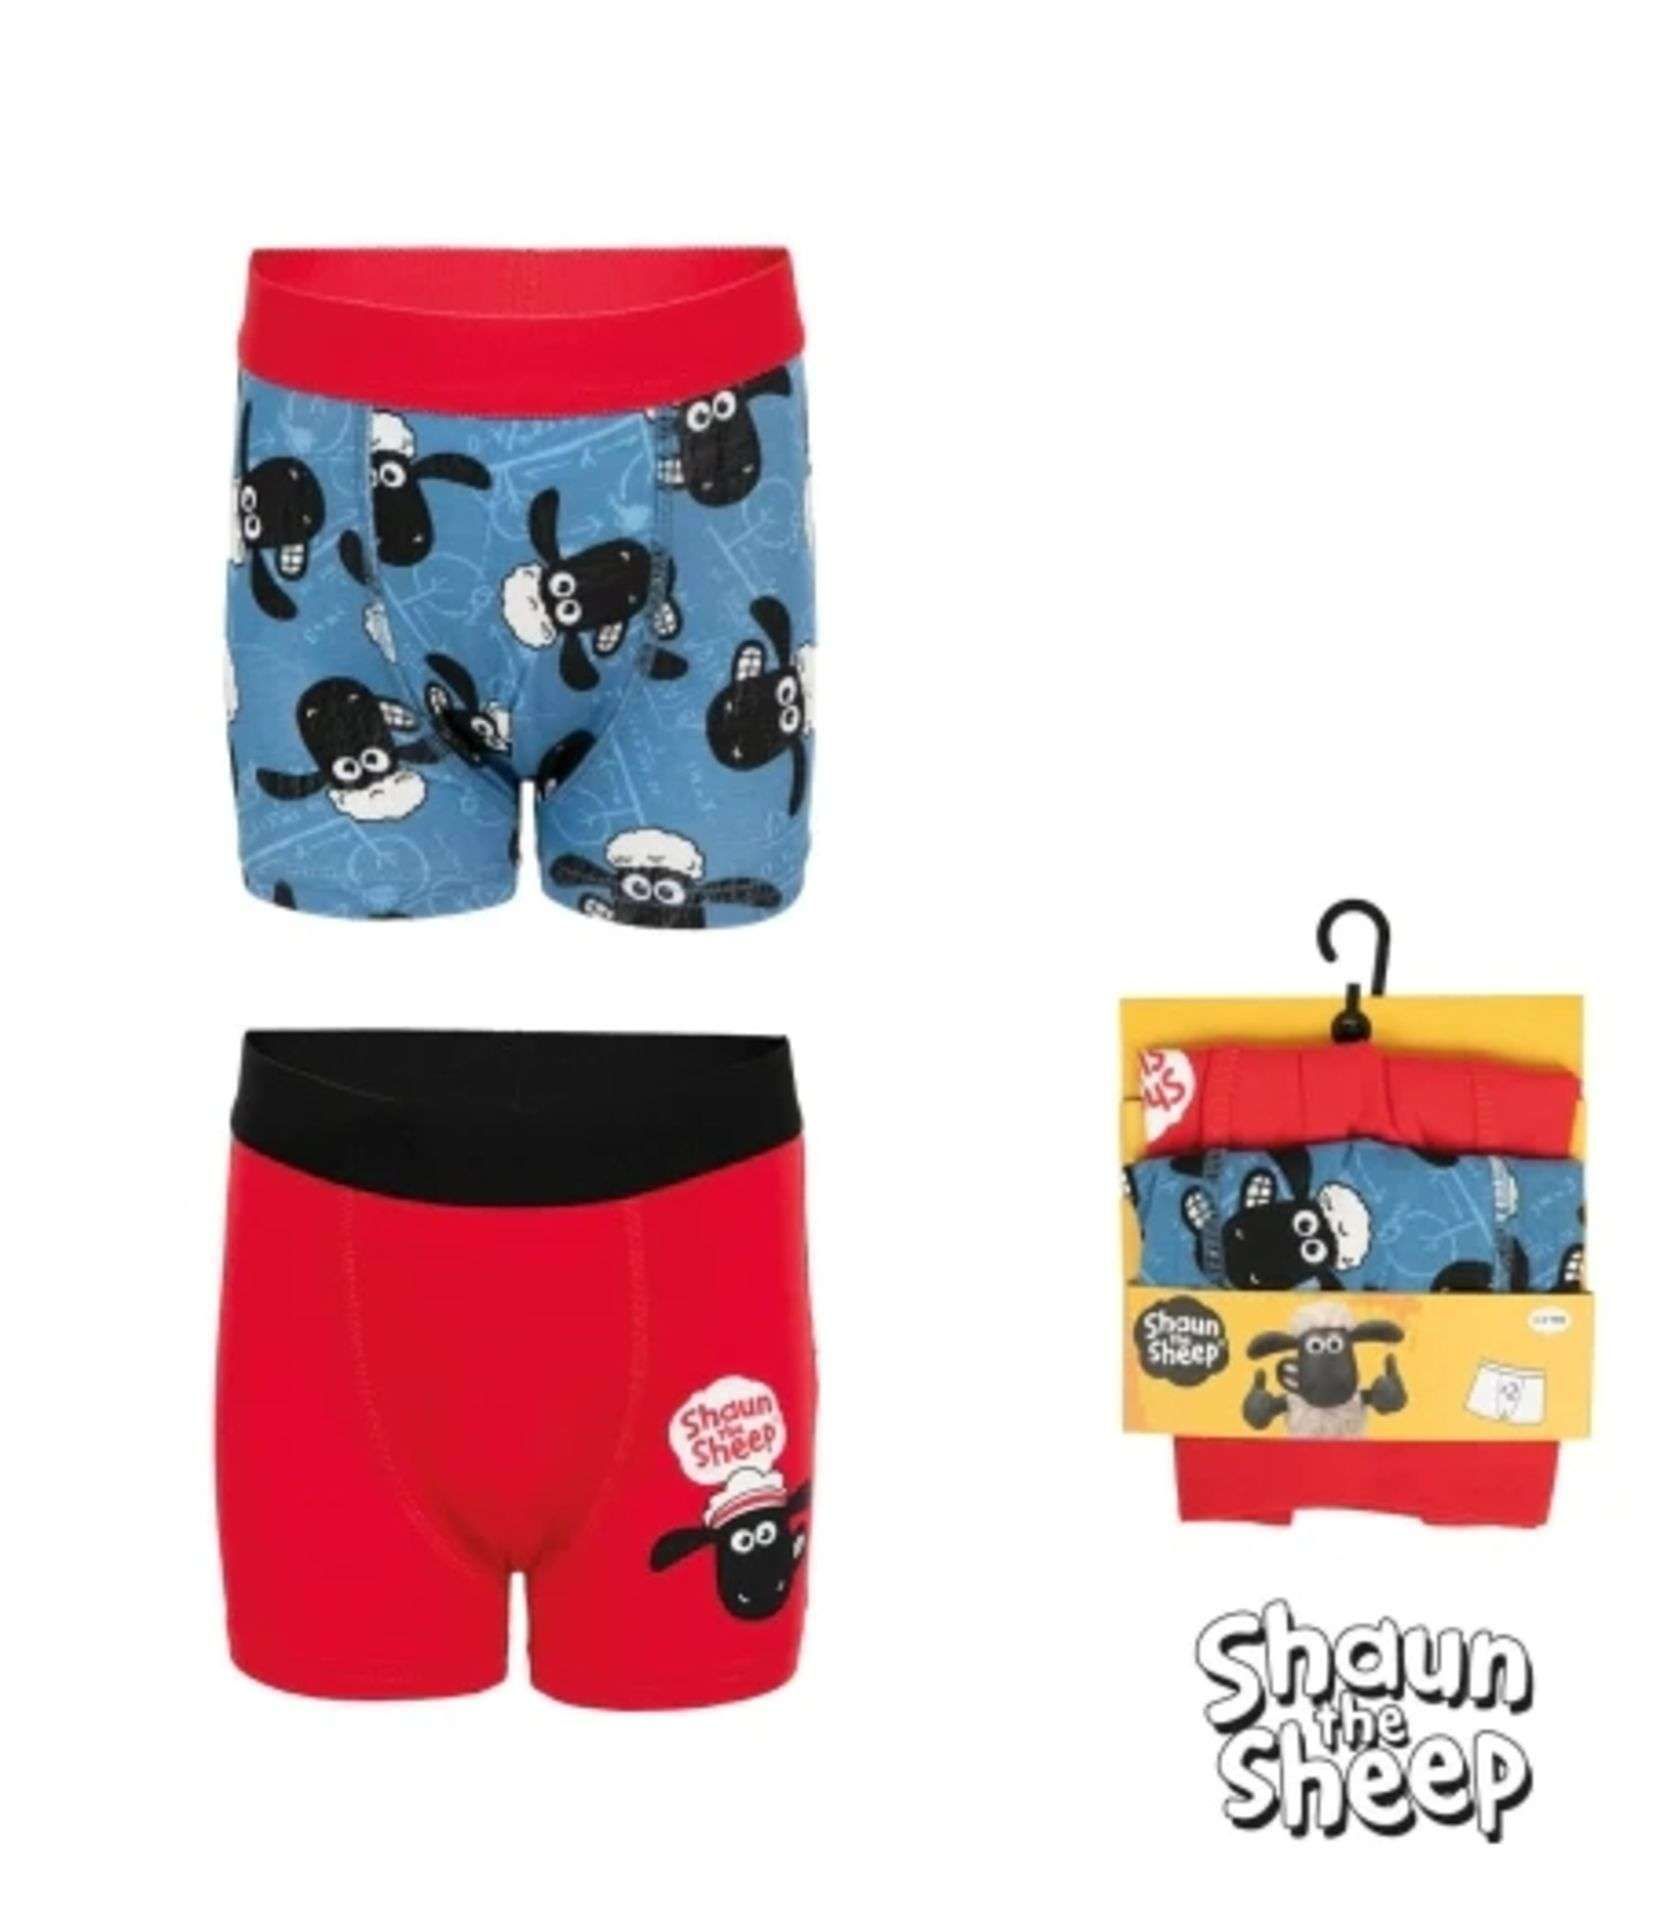 TRADE LOT 75 X BRAND NEW SHAUN THE SHEEP SETS OF 2 ASSORTED BOXERS (SIZES MAY VARY) DB